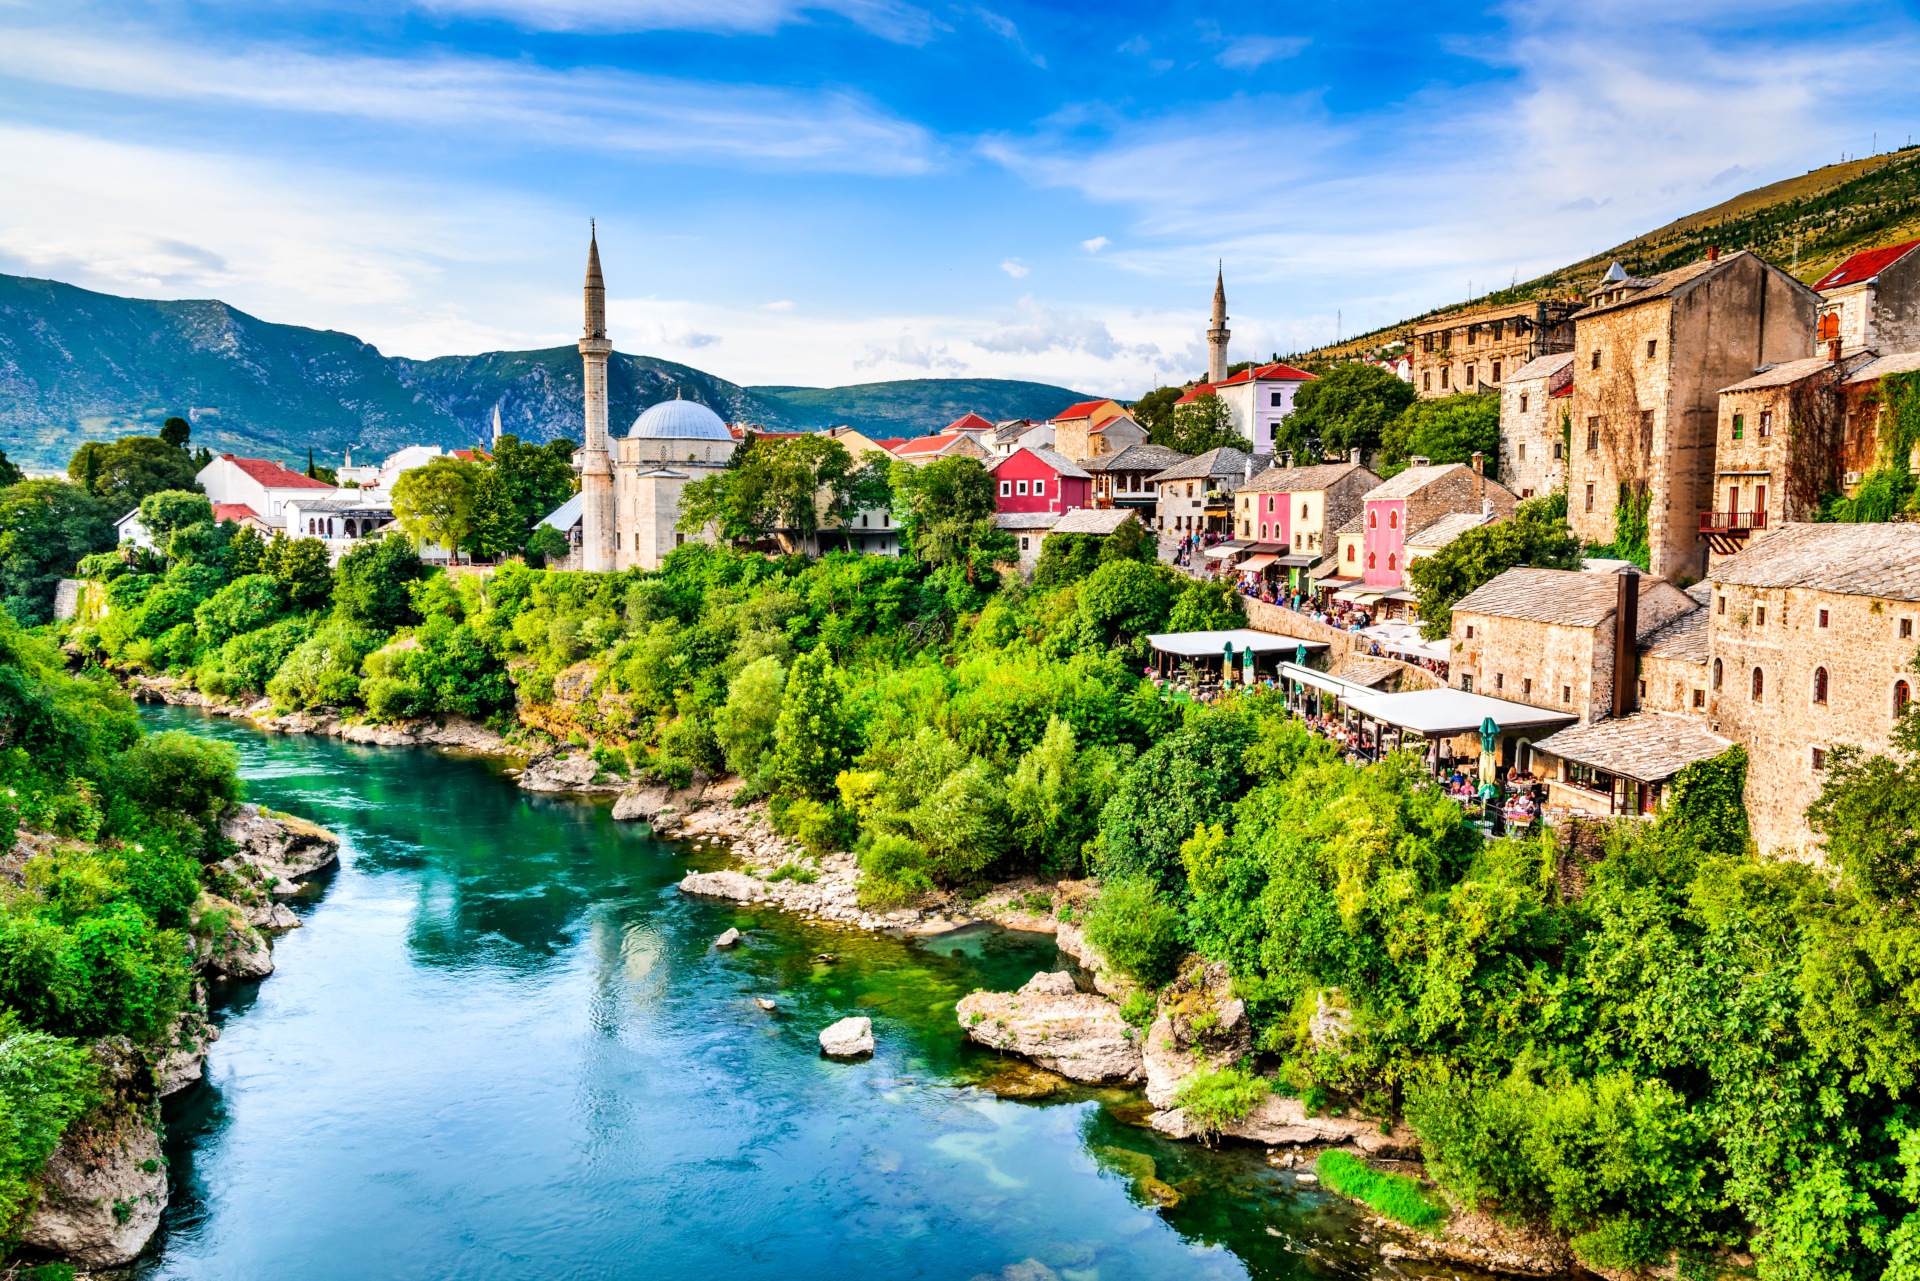 1-Day Mostar and Medjugorje Tour from Dubrovnik